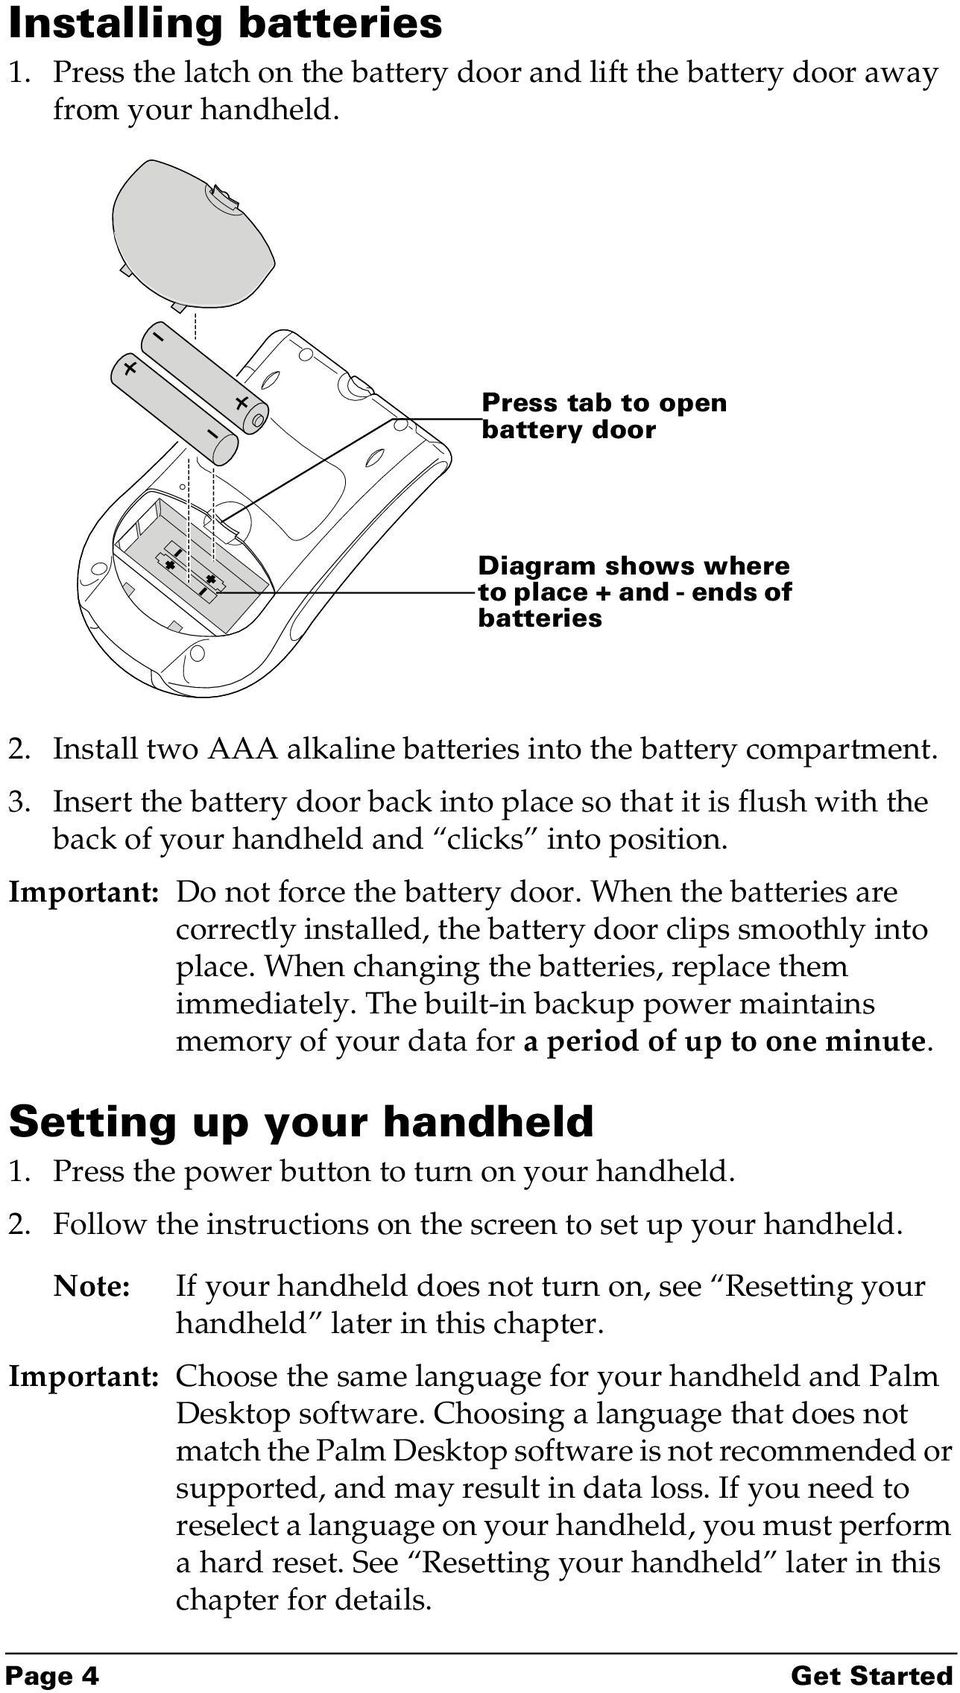 Important: Do not force the battery door. When the batteries are correctly installed, the battery door clips smoothly into place. When changing the batteries, replace them immediately.